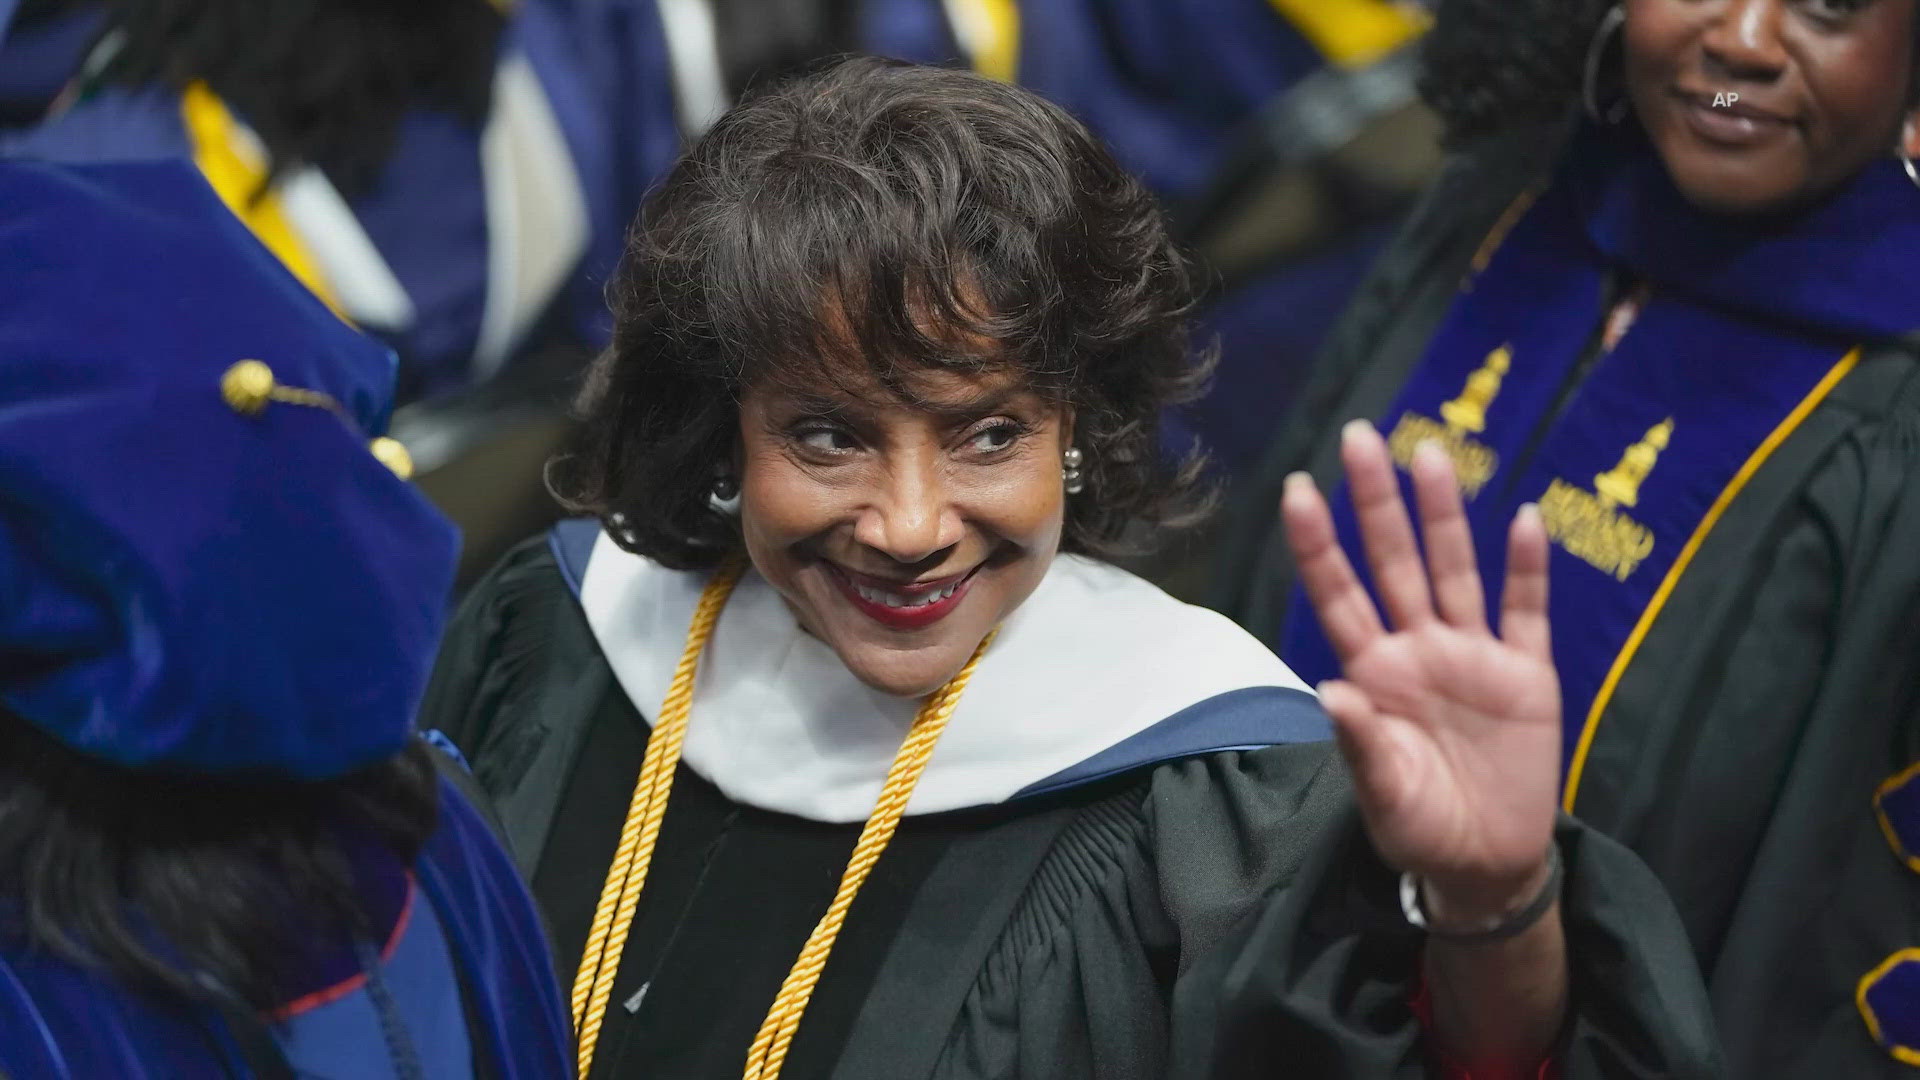 Rashad is best known from her role as America’s mom from "The Cosby Show" but three years ago, she gained another title – Dean of the College of Fine Arts at Howard.